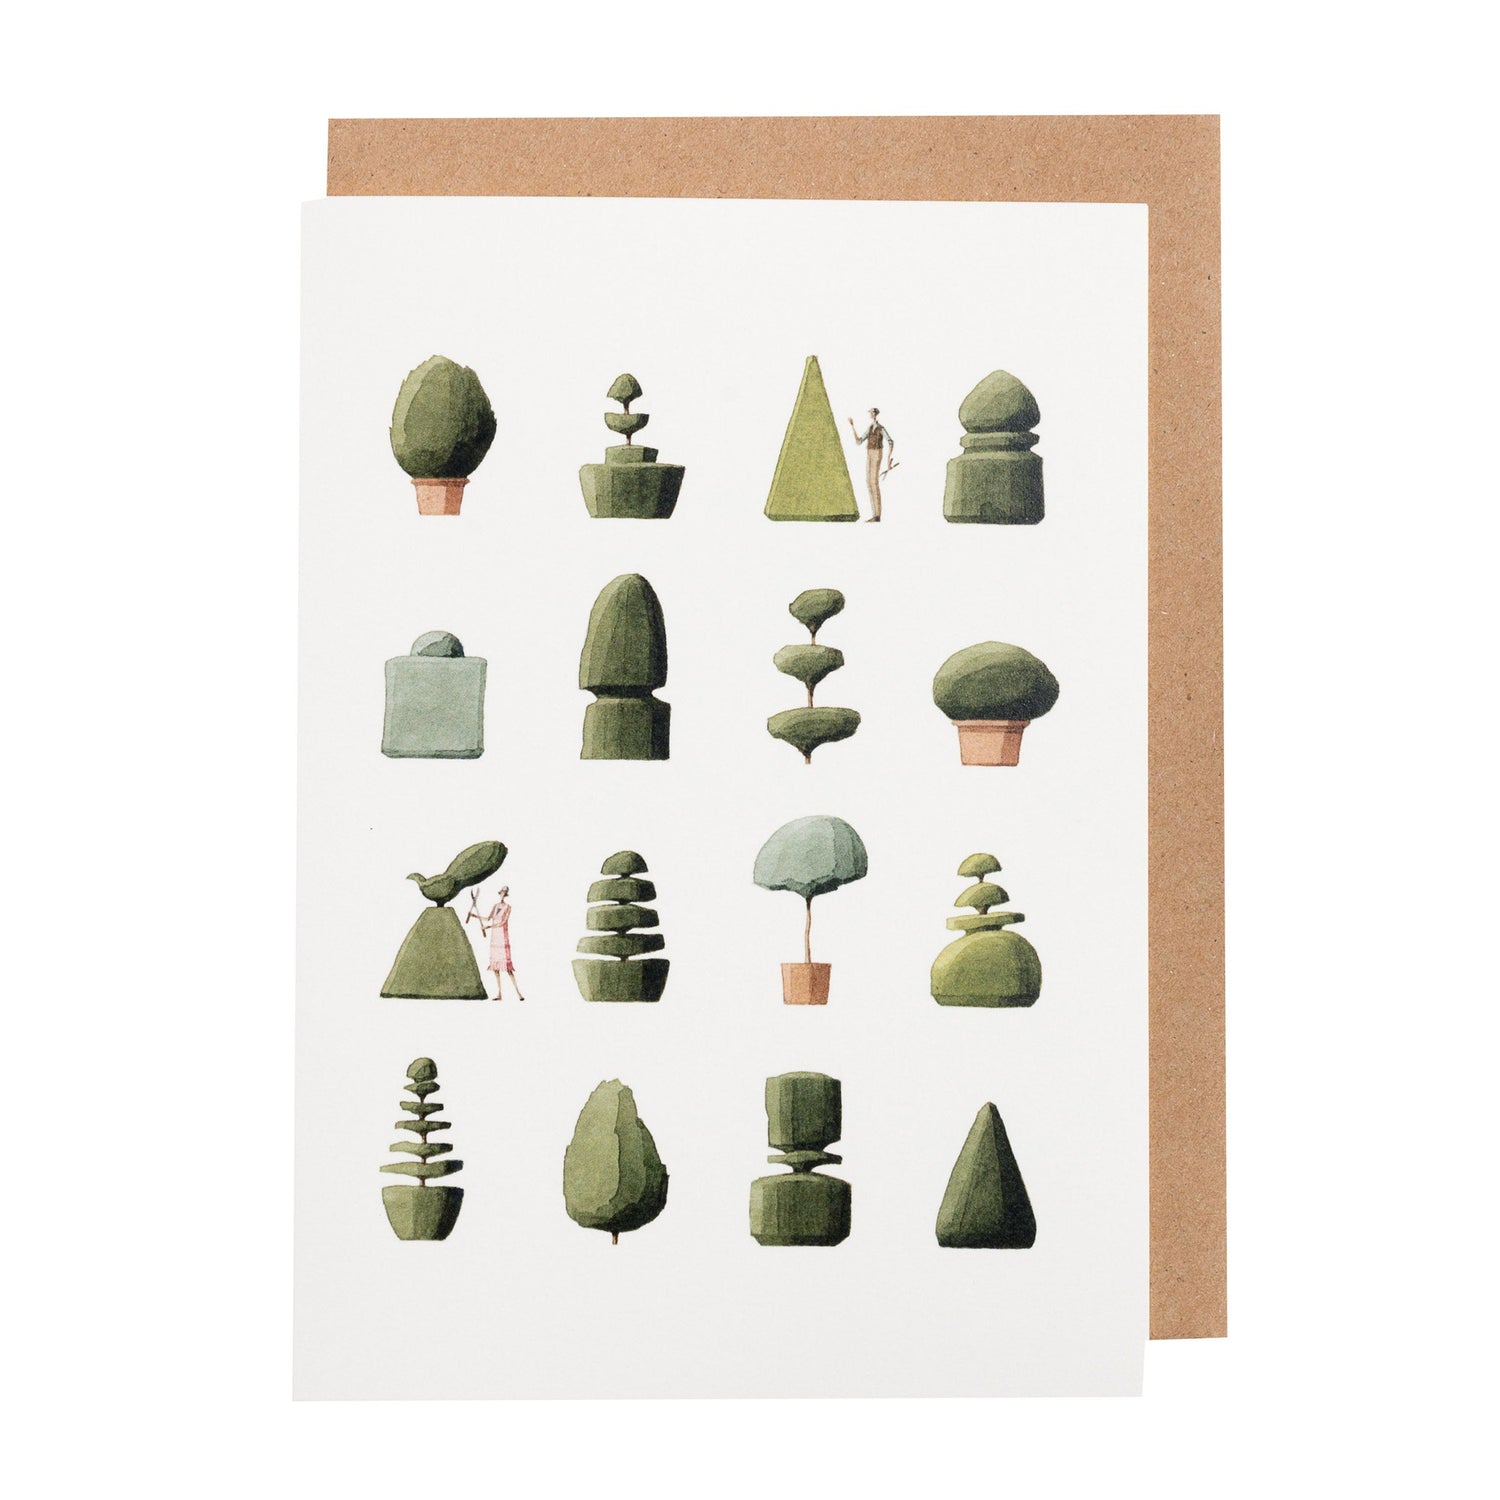 environmentally sustainable paper, compostable packaging, recycled paper, made in england, illustration, topiary